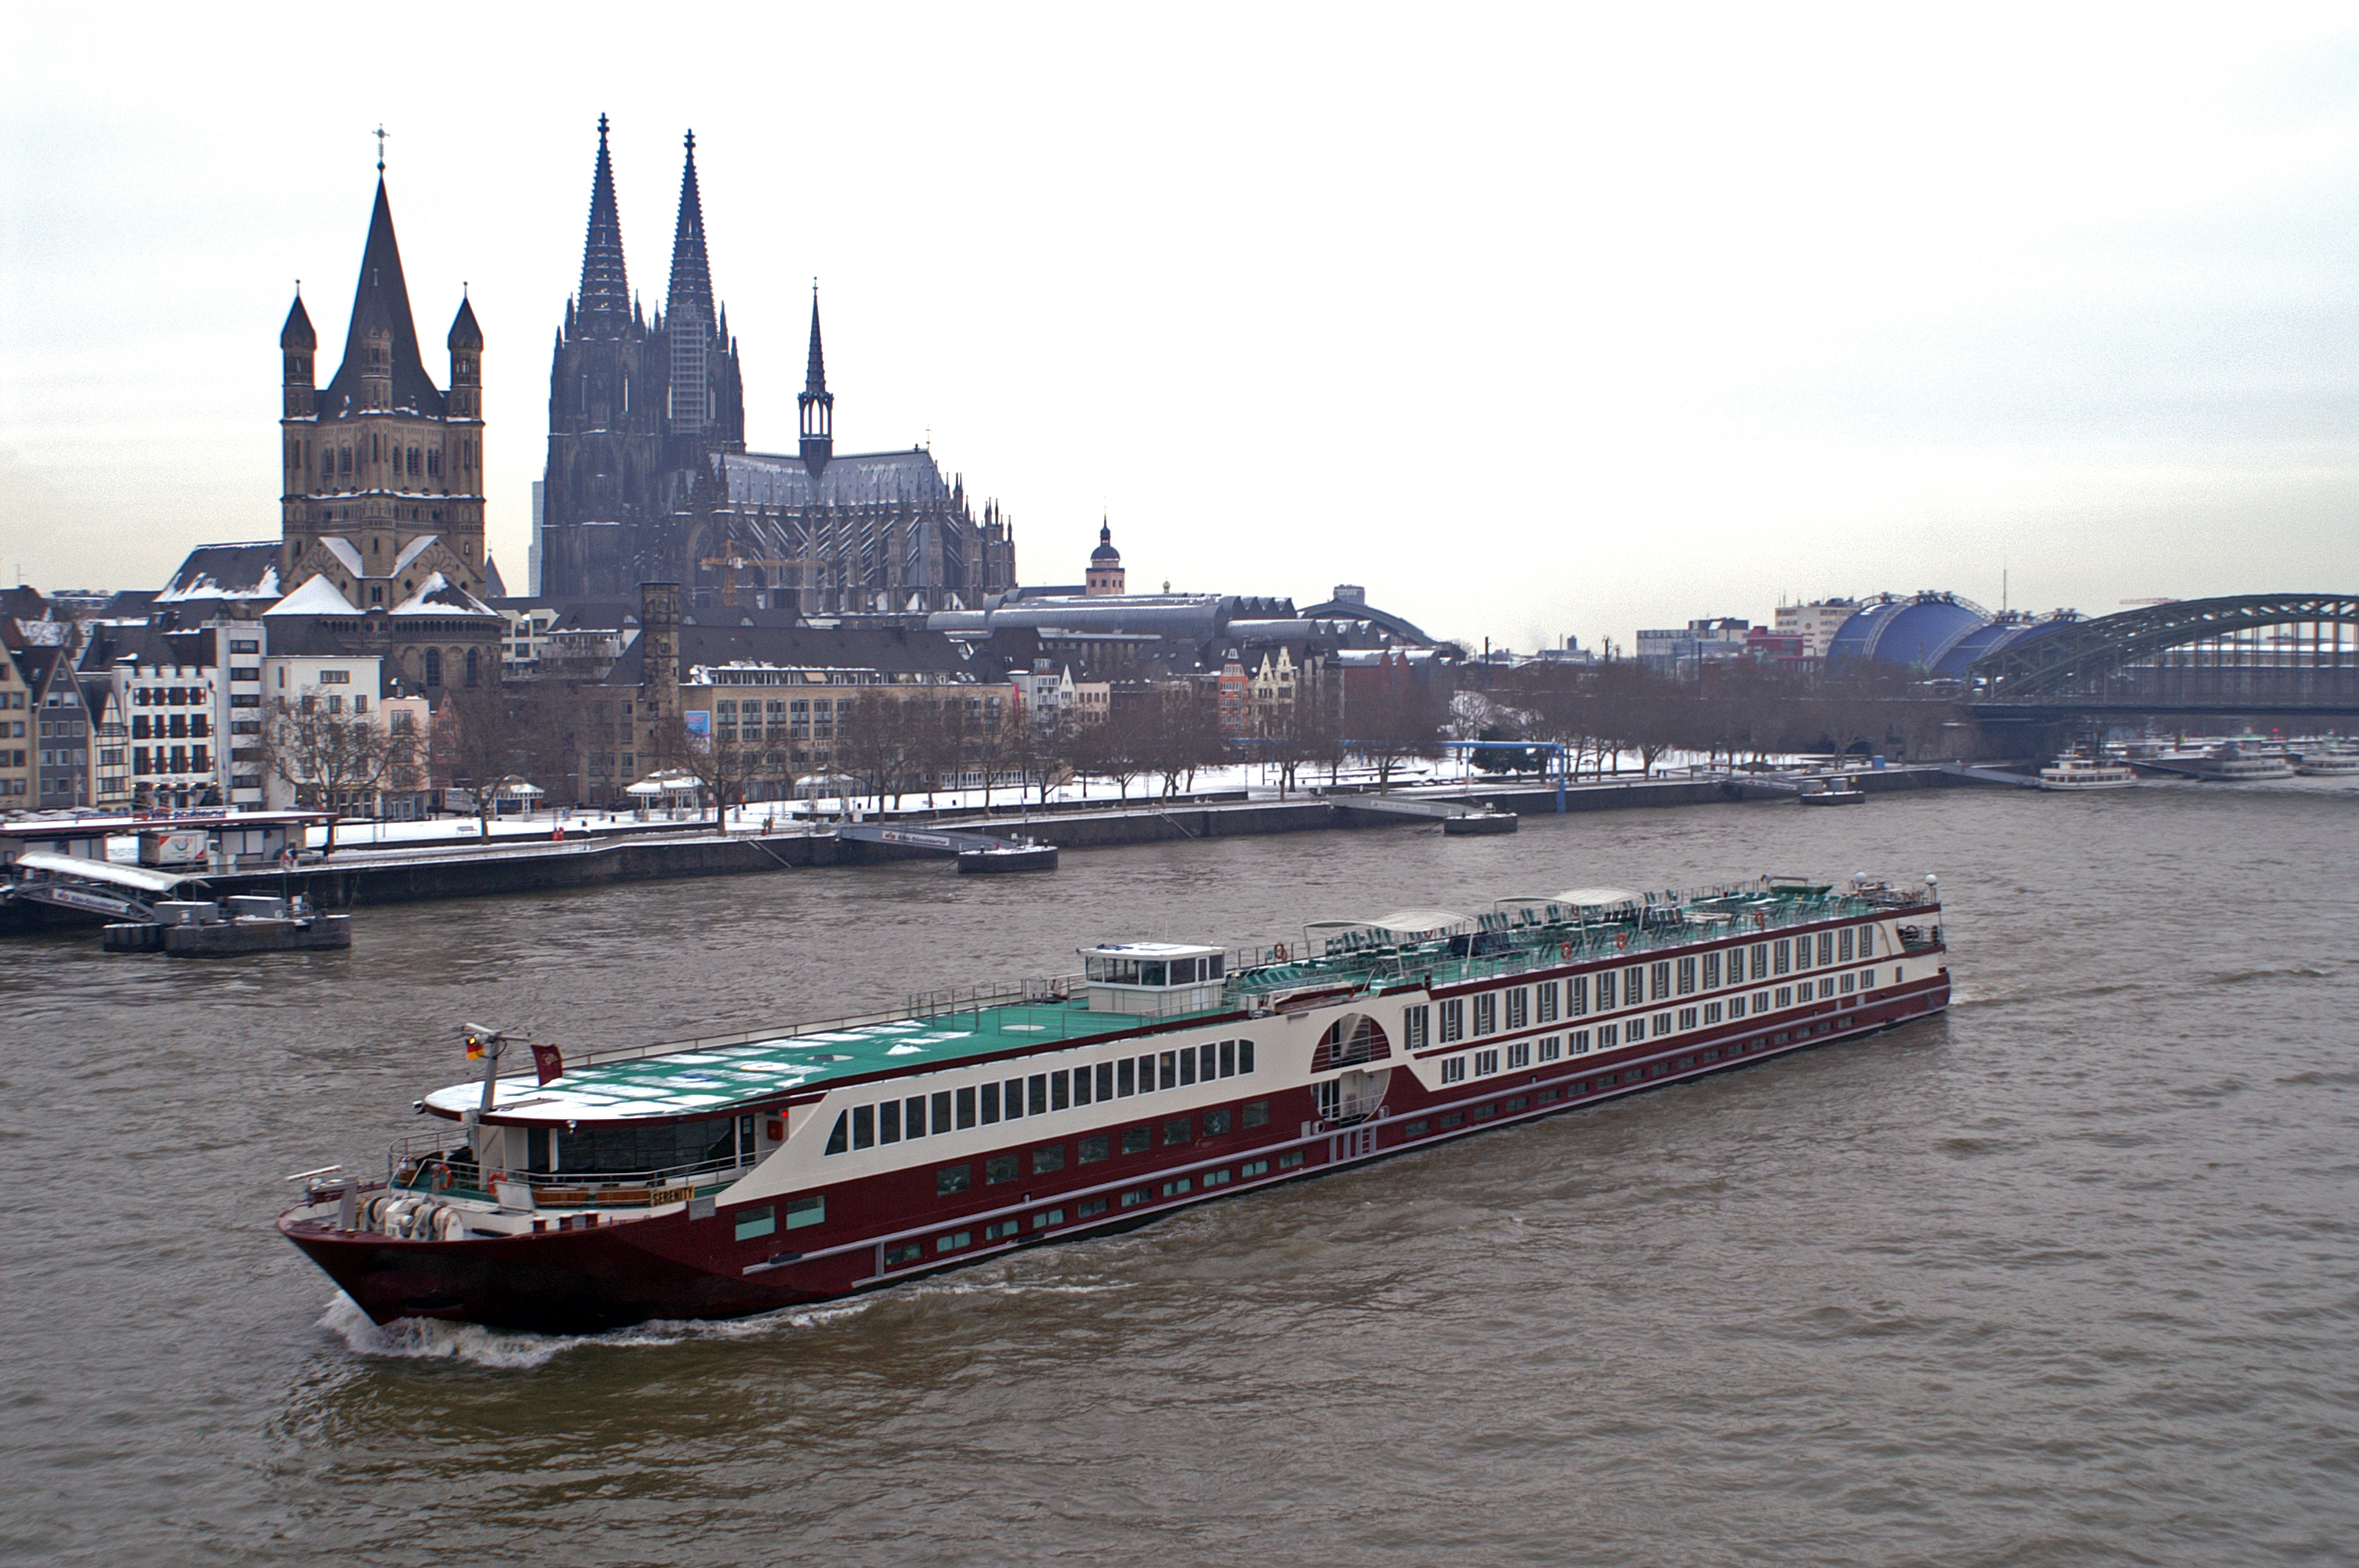 MS Serenity, Cologne, Germany - 20101122-004